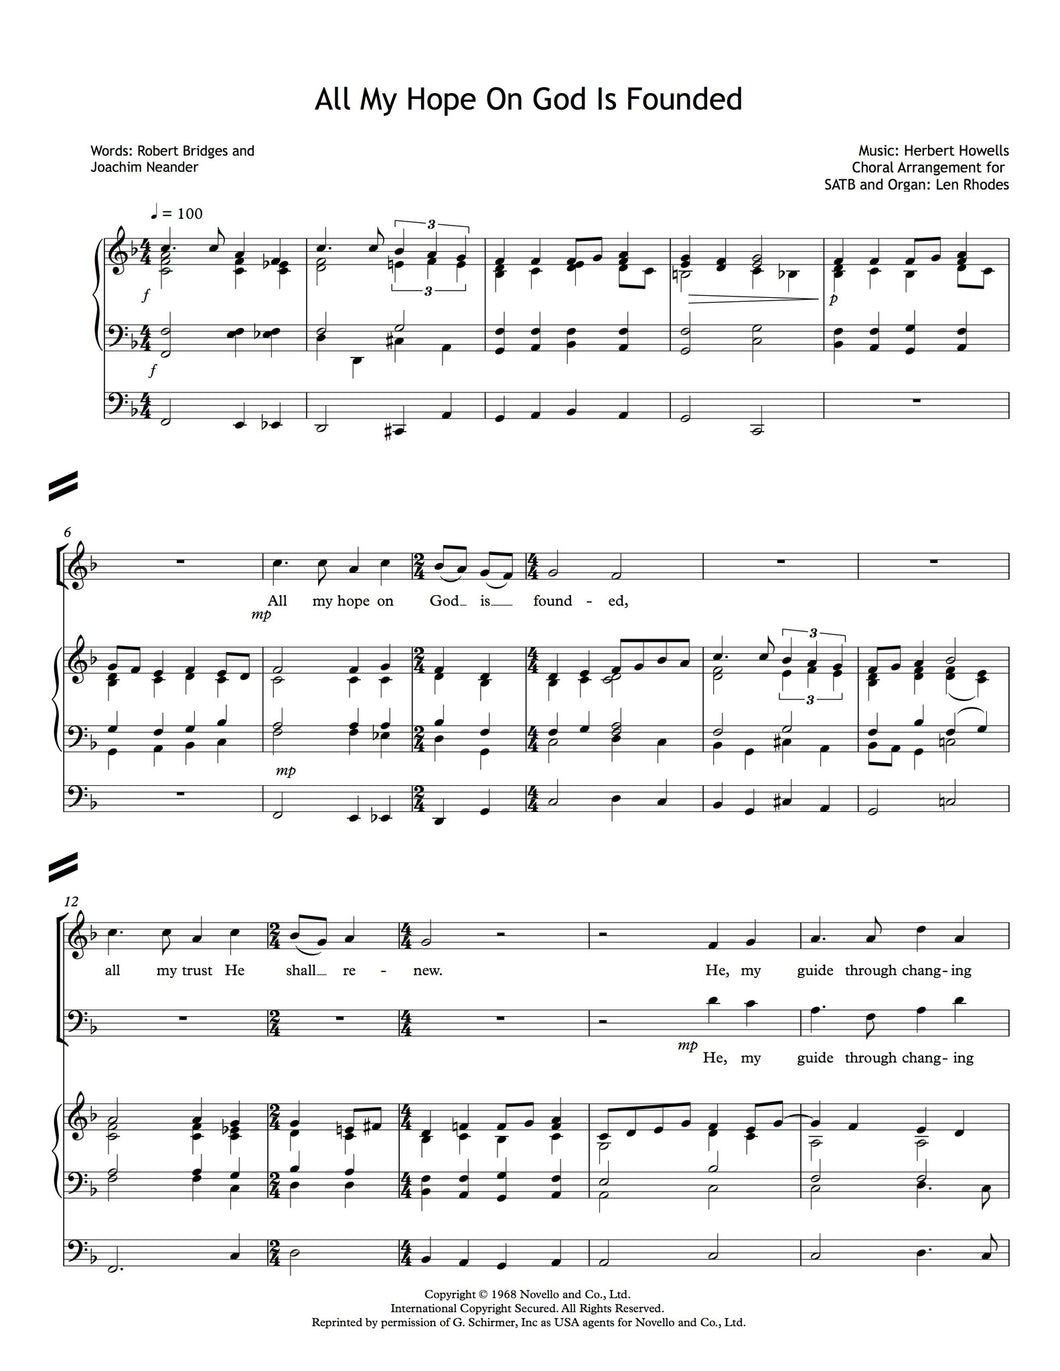 All My Hope On God Is Founded, Herbert Howells - SATB and Organ